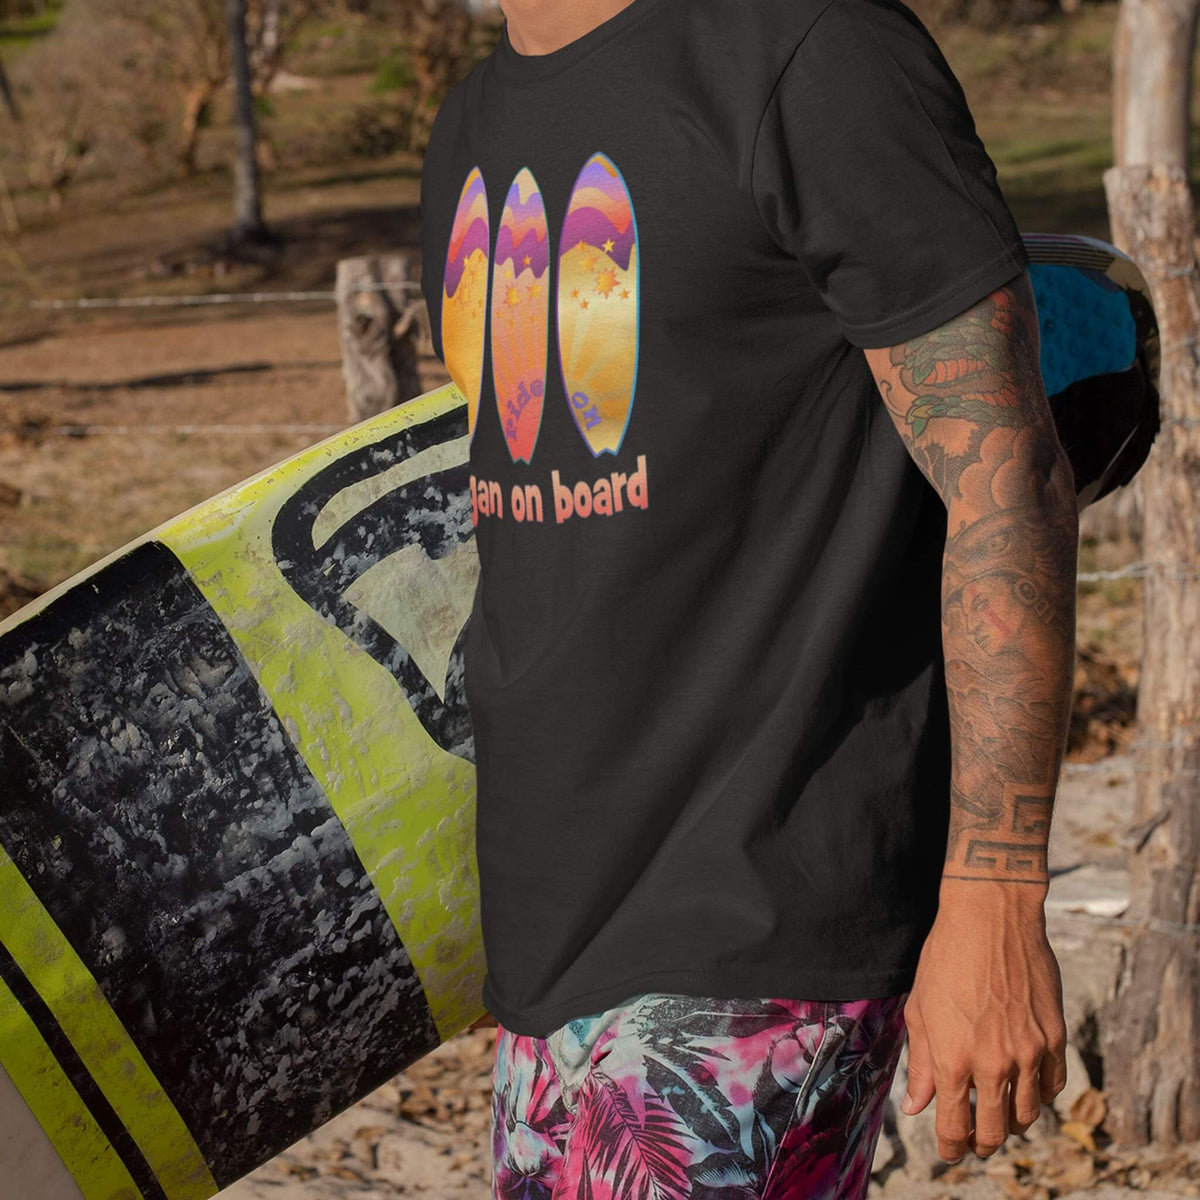 surfer wears black tee with Bogan on Board graphic design